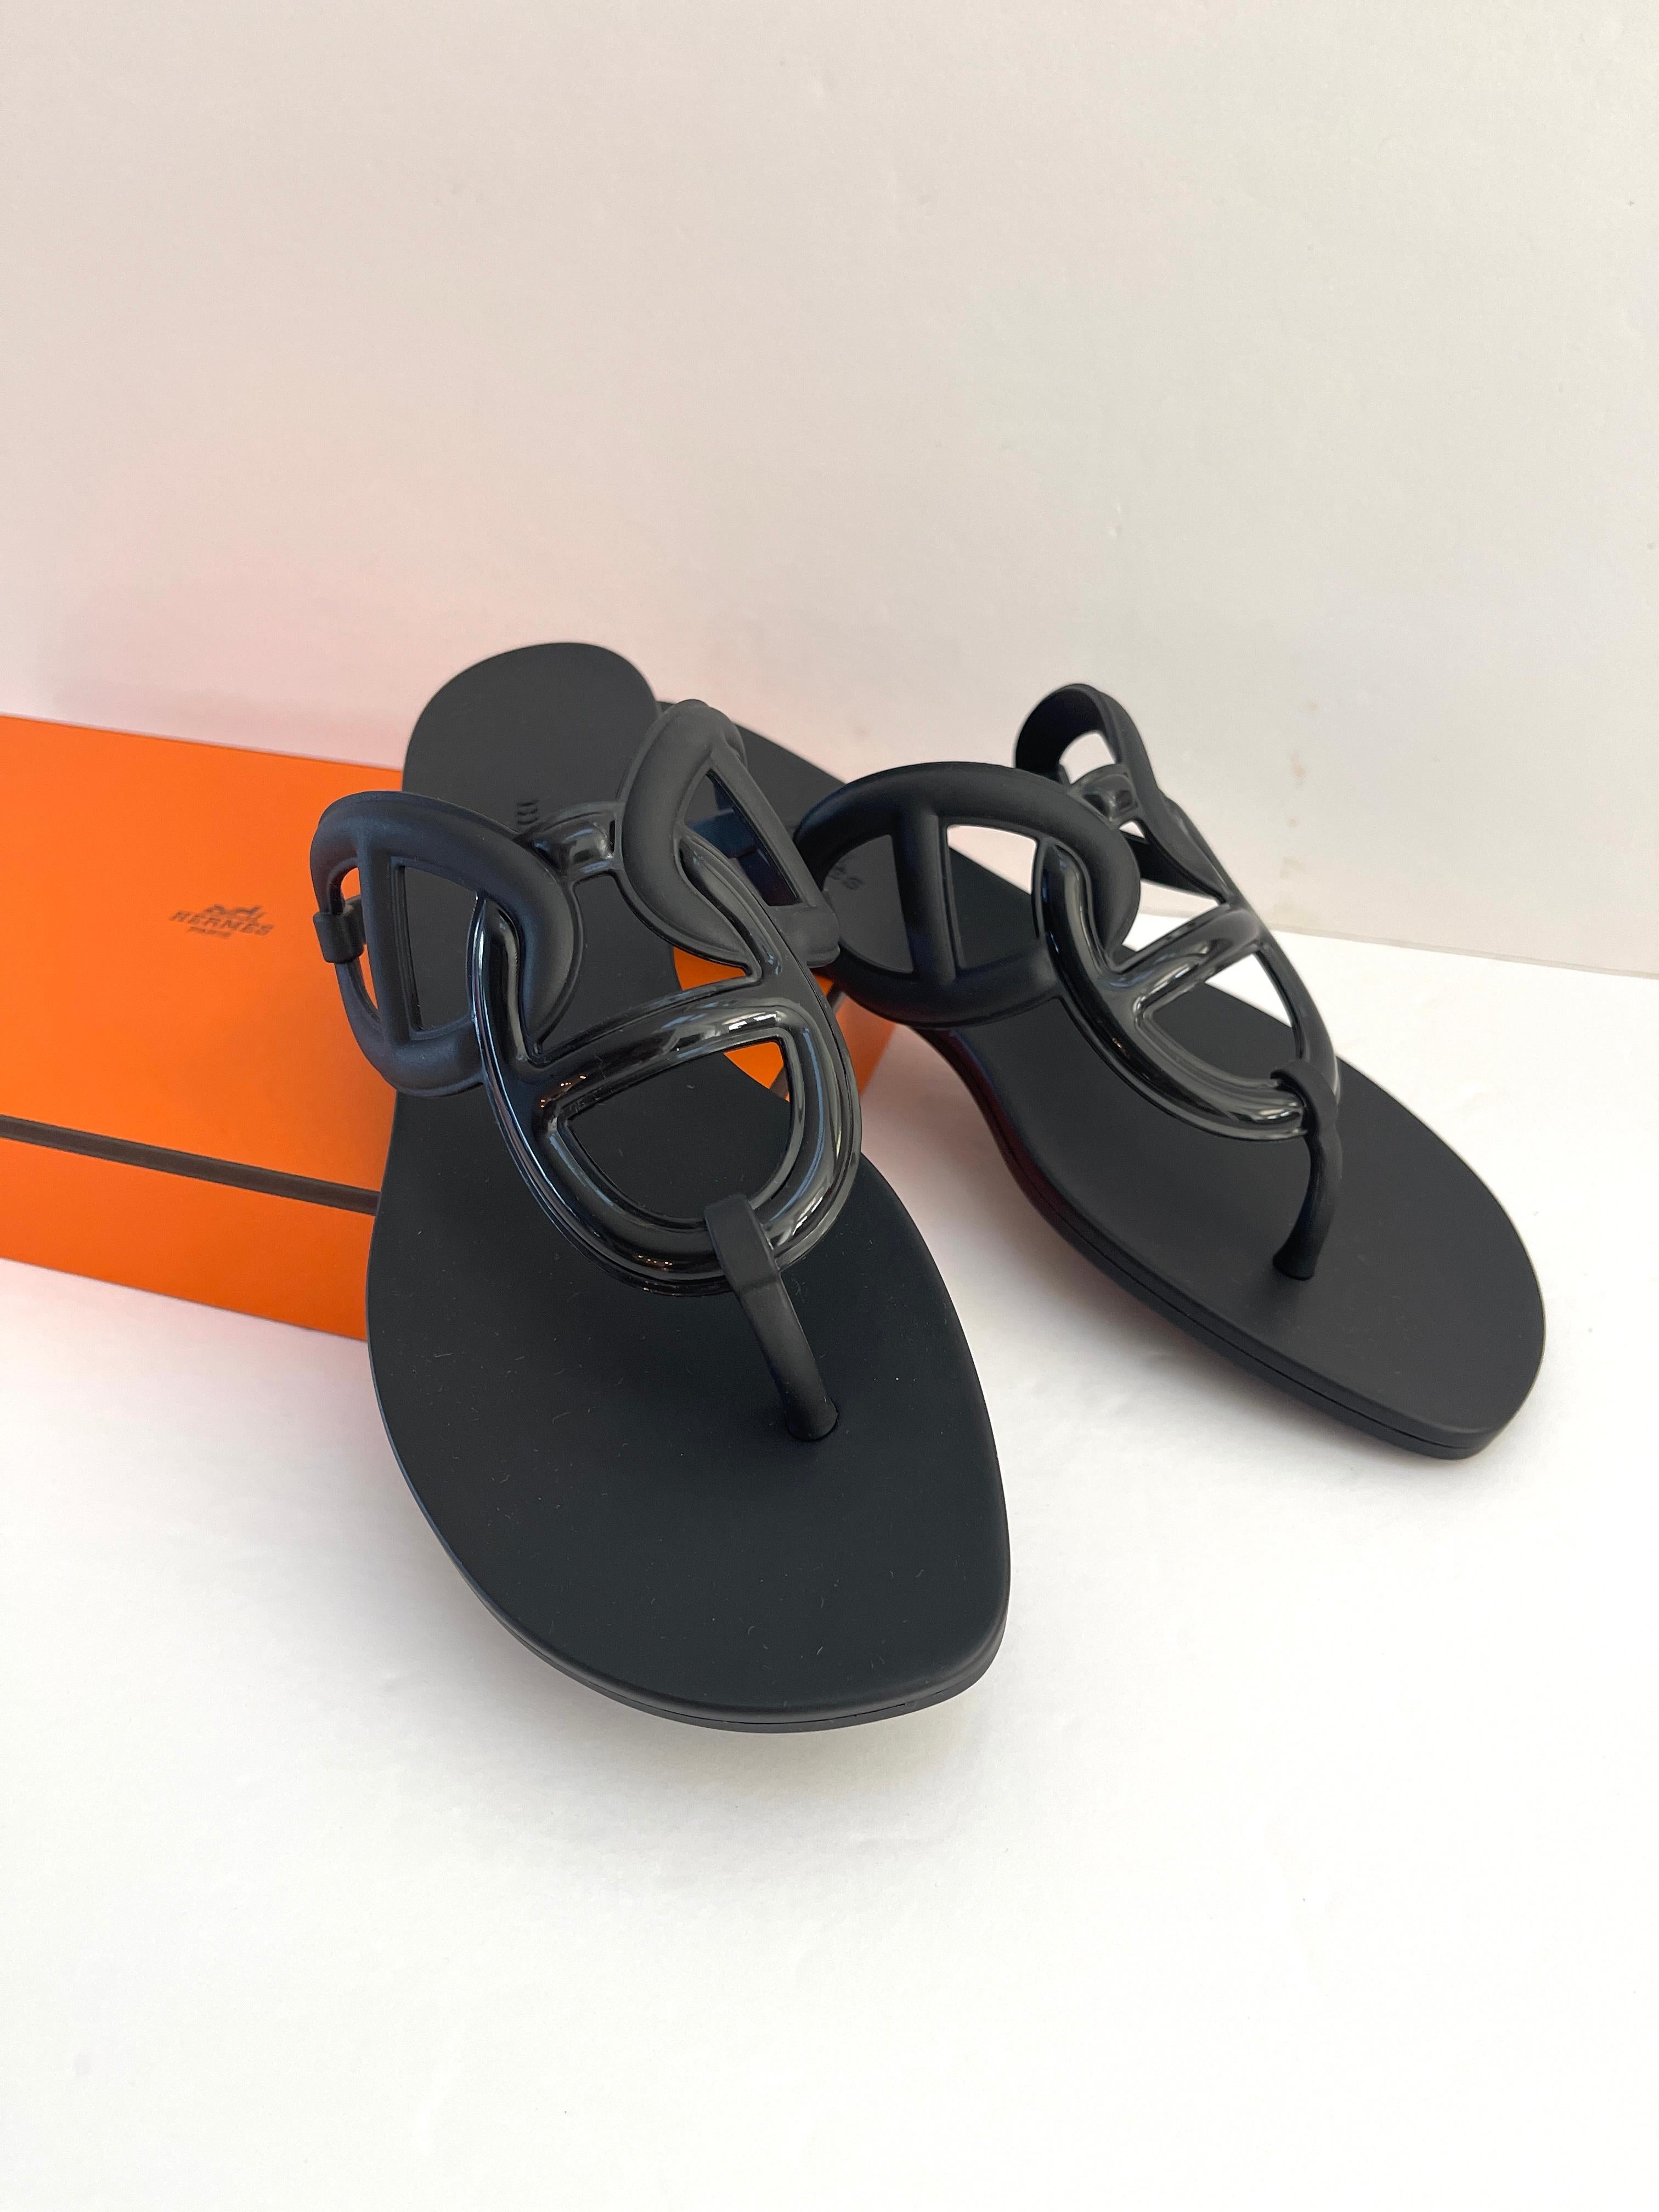 Egerie Sandals
Jelly Rubber
Black
Size 36
New in Hermes Box with Dustcovers
New never used